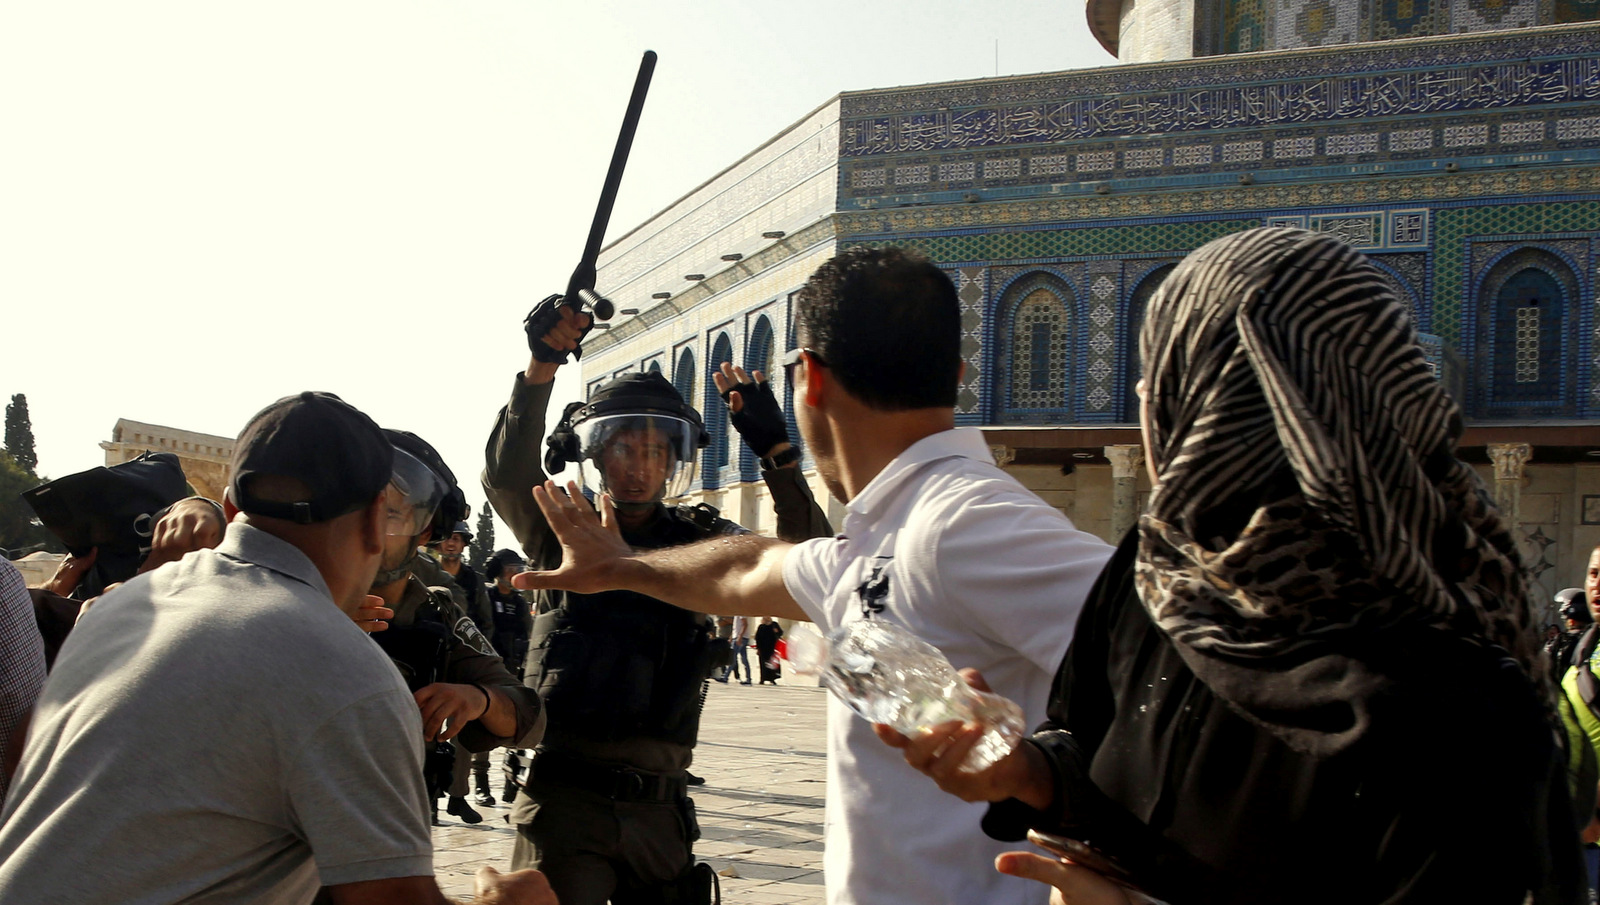 An Israeli police officer raises his baton on Palestinians worshipers near the Al Aqsa Mosque in Jerusalem’s Old City, July 27, 2017. Mahmoud Illean | AP